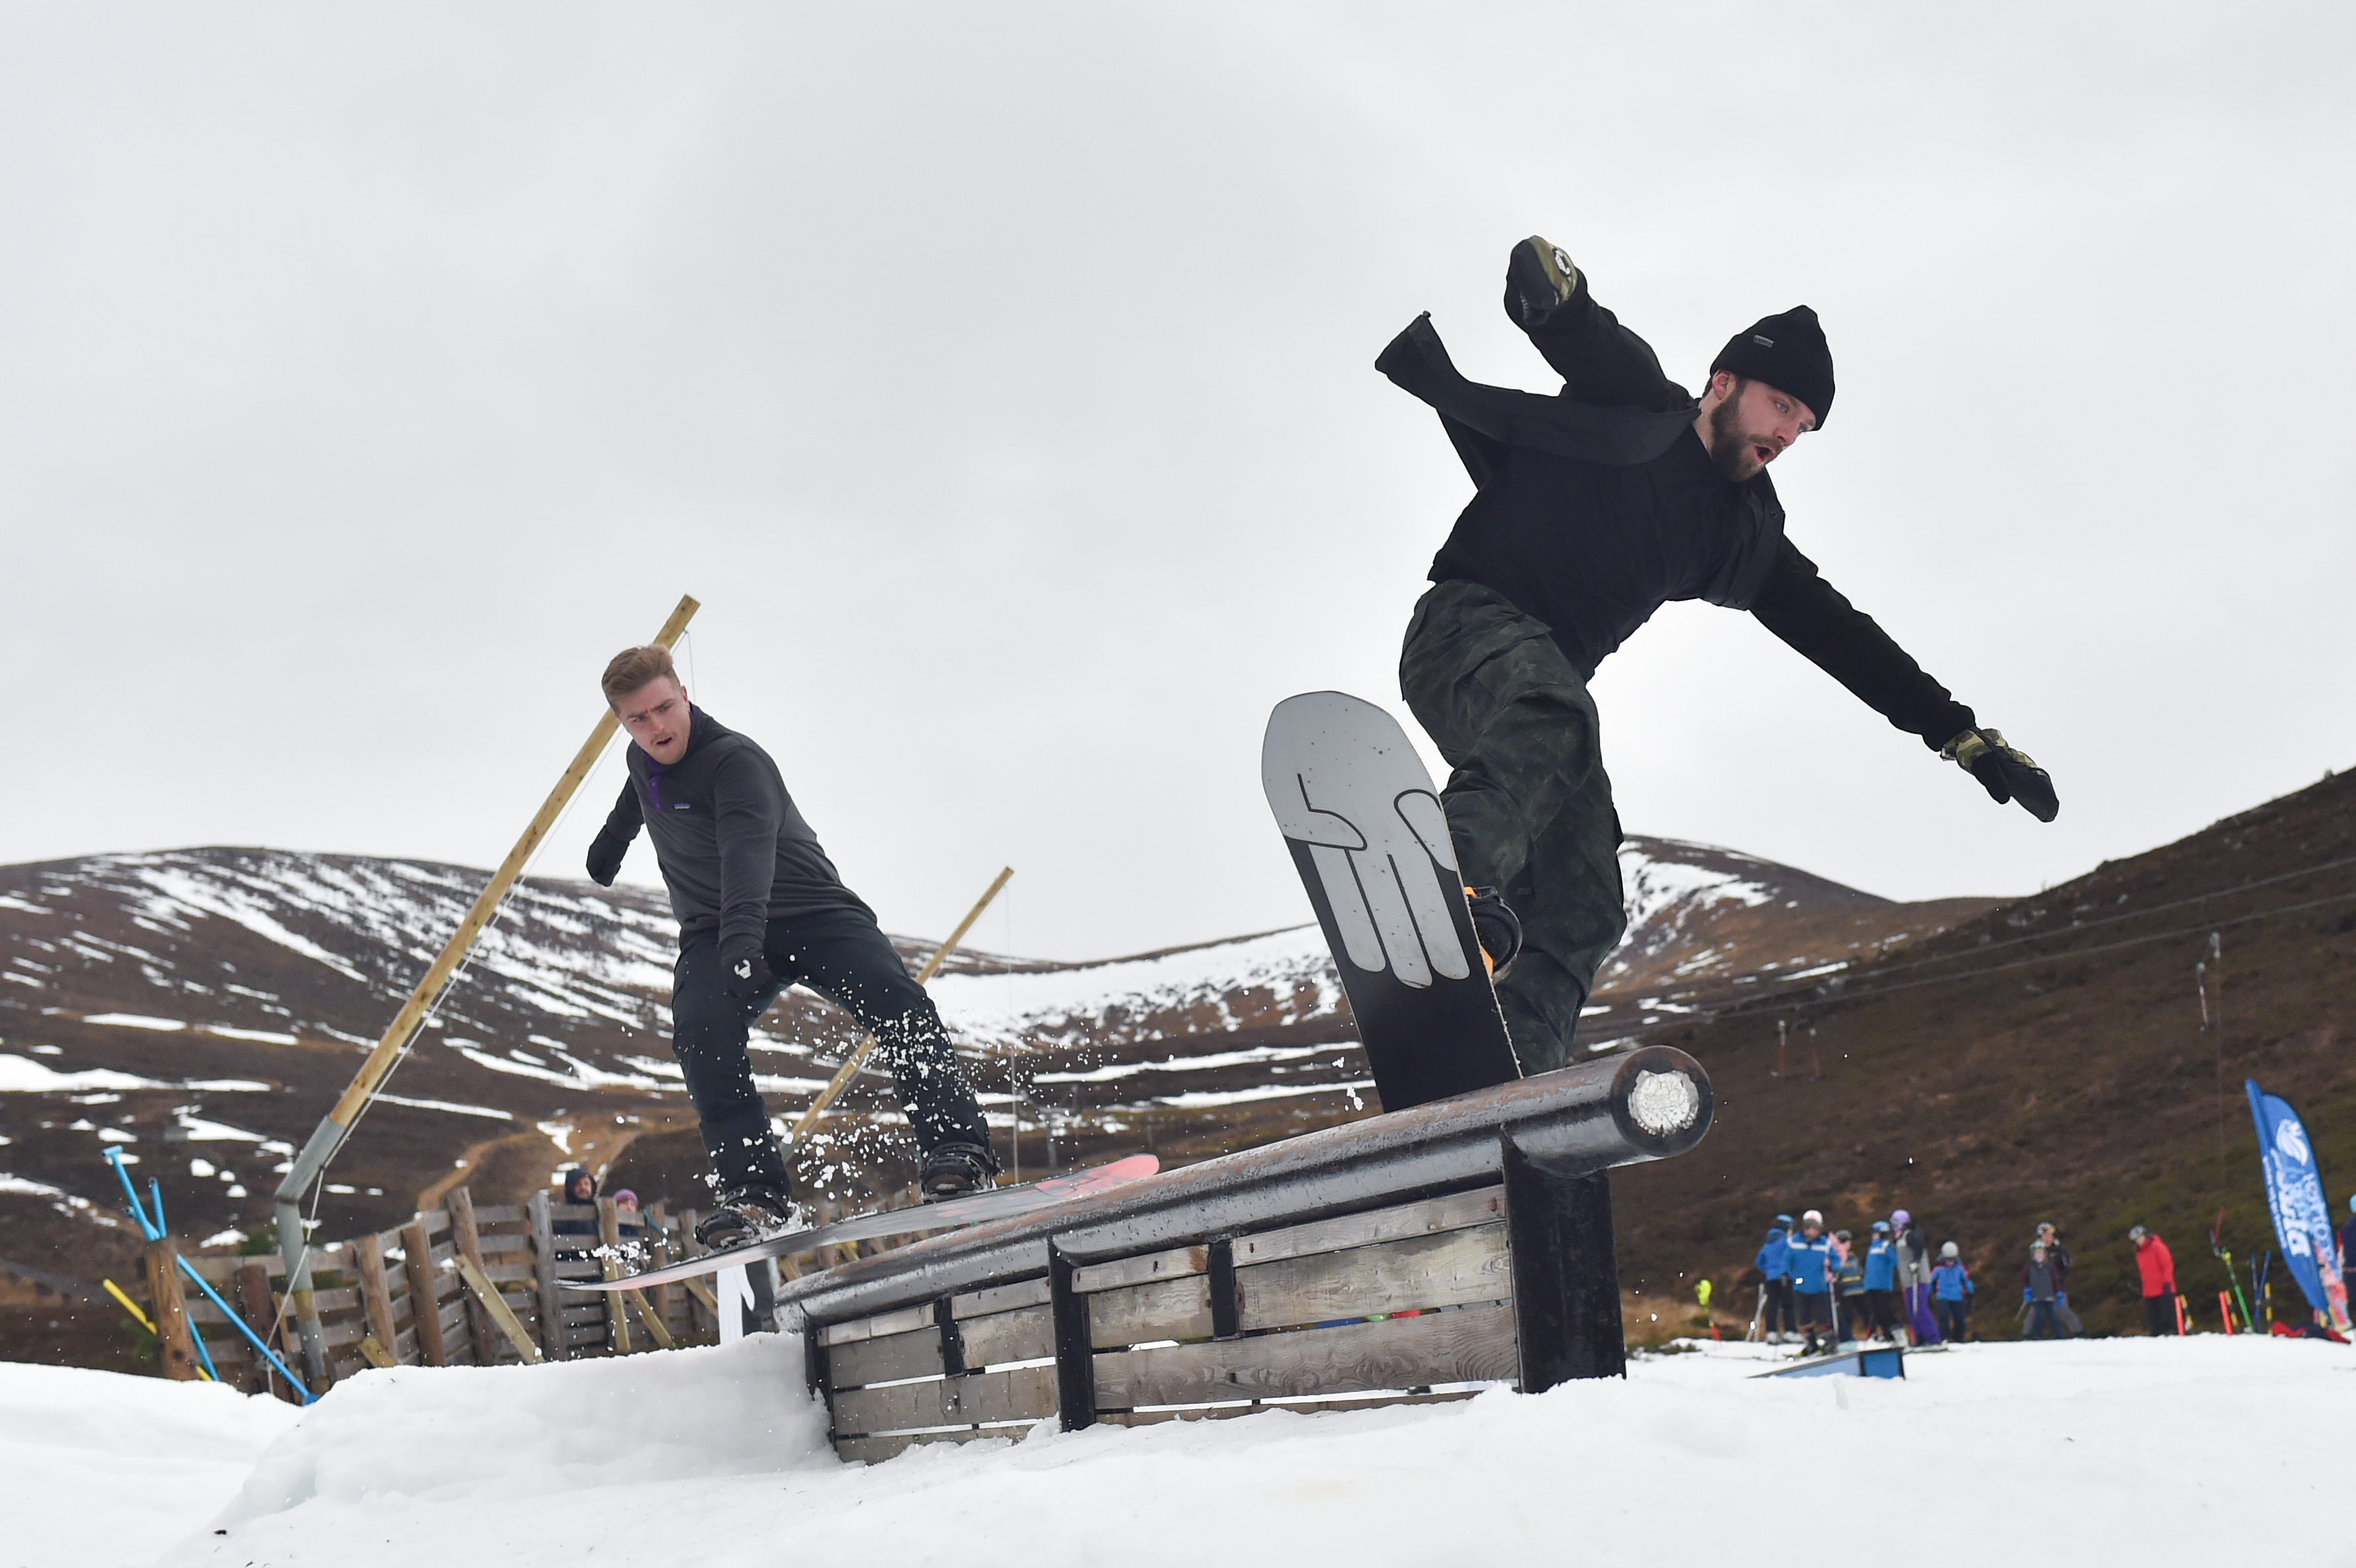 Local snow boarders and brothers Jamie  and Angus Trinder from Aviemore use the rail to get air. Picture by Jason Hedges